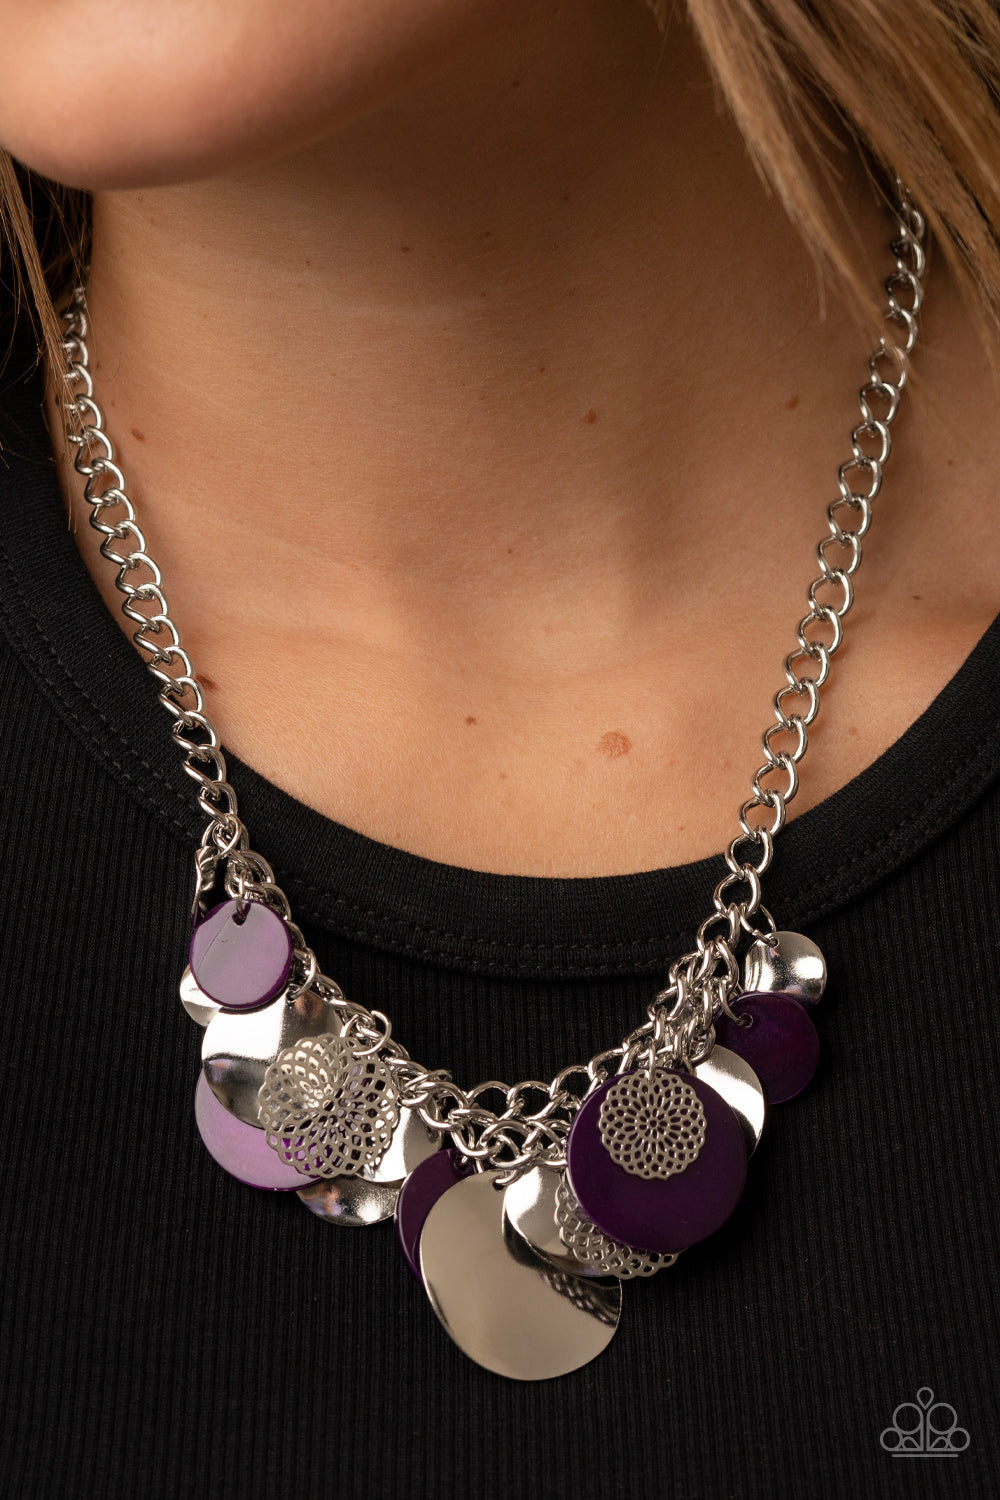 Paparazzi Accessories - Oceanic Opera - Purple Necklaces a summery collection of bent silver discs, plum shell-like discs, and silver mandala-like accents cascades from a pair of layered silver chains, resulting in a bubbly and boisterous fringe below the collar. Features an adjustable clasp closure.  Sold as one individual necklace. Includes one pair of matching earrings.